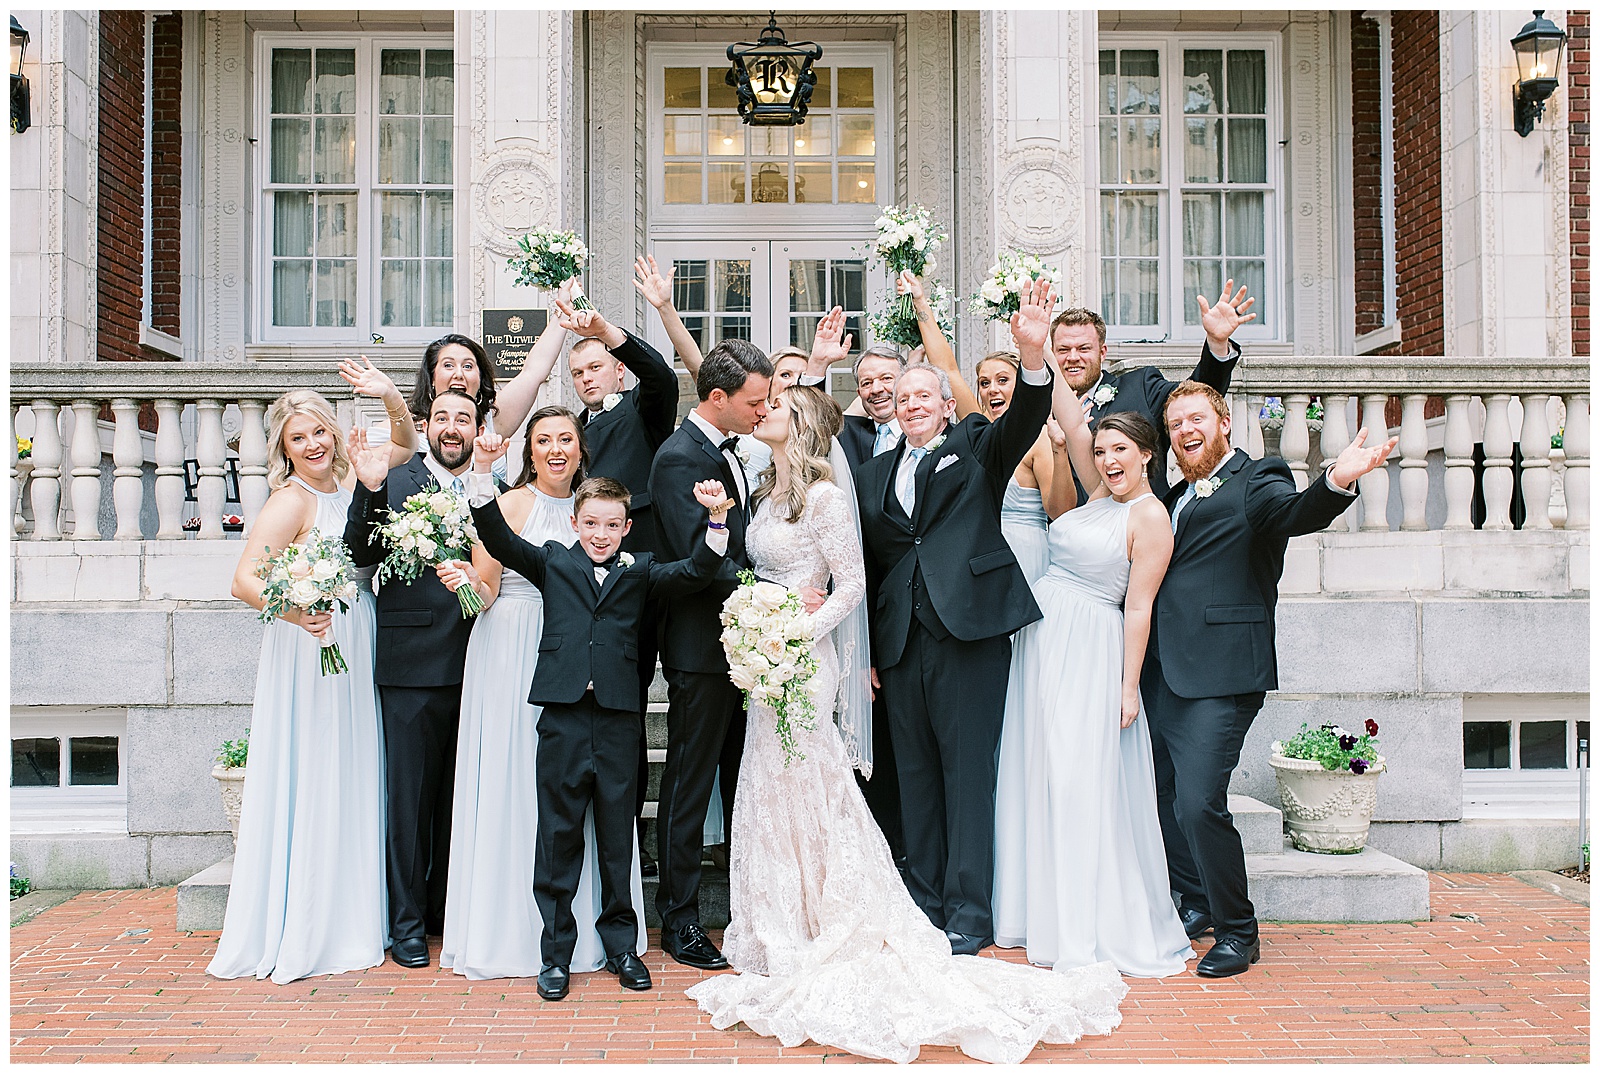 Wedding Party at The Tutwiler Hotel